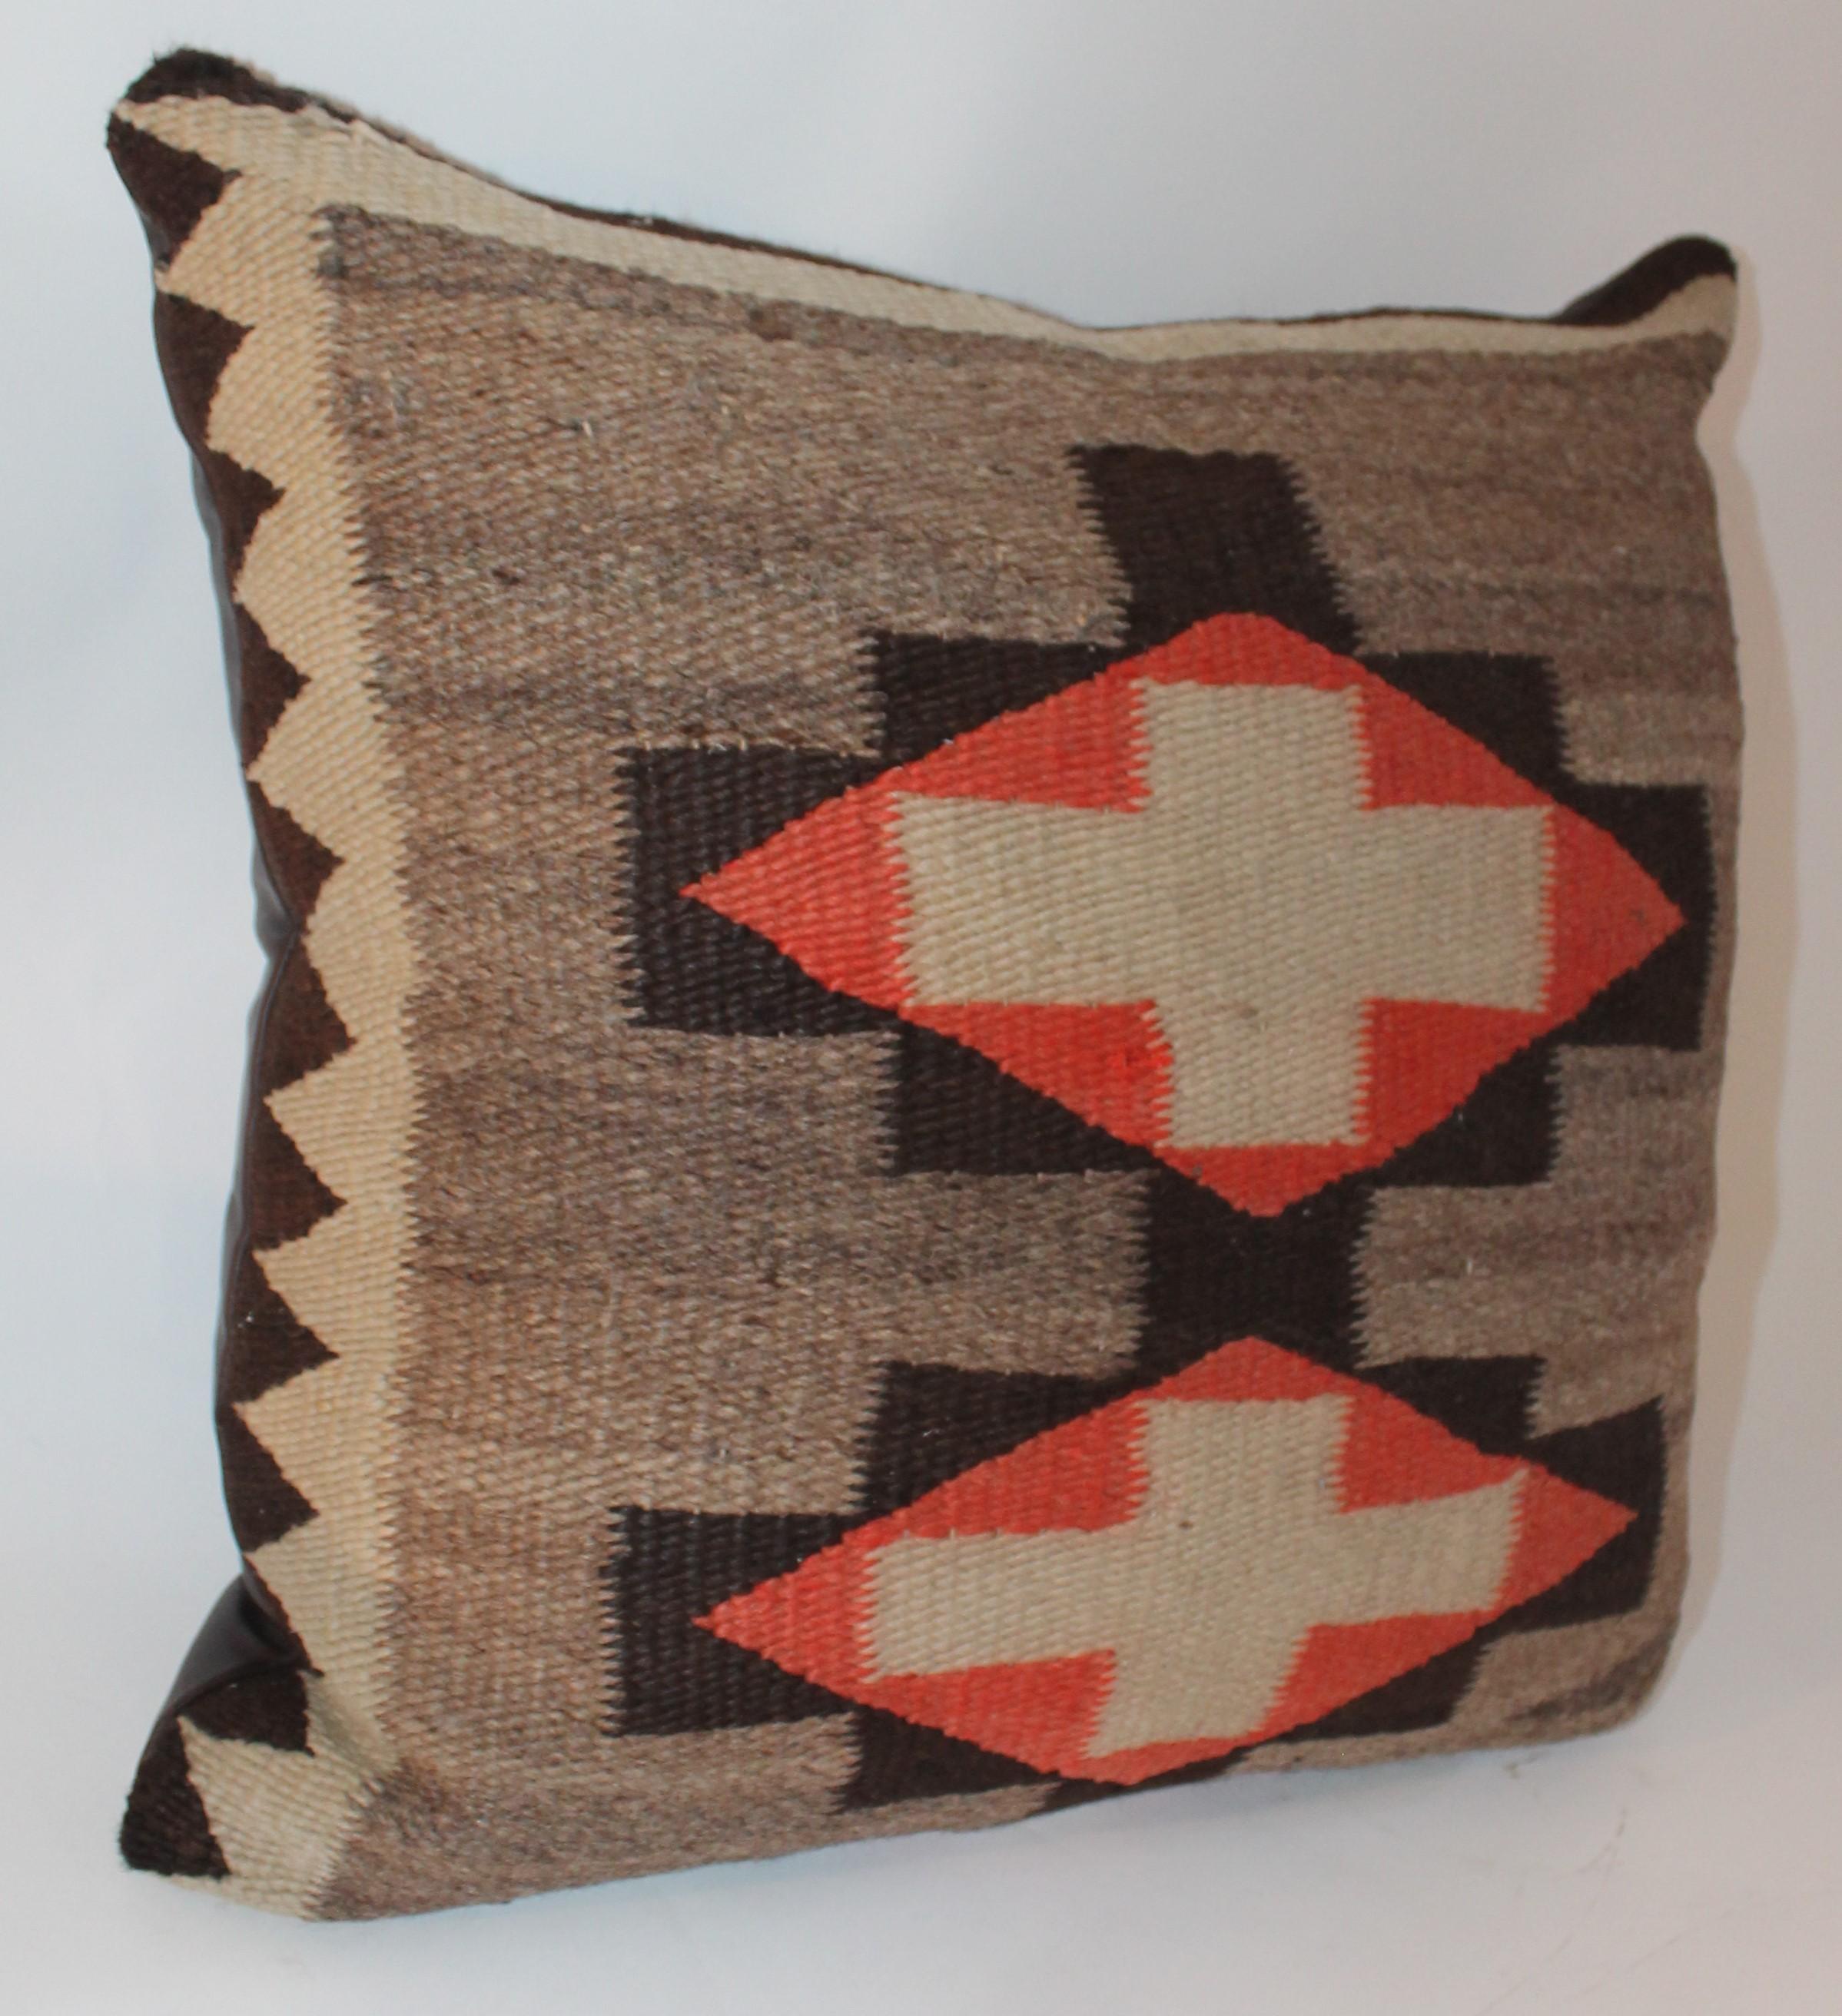 This fine geometric Navajo Indian weaving pillow is from the 19th century. The backing is in very good condition and is in soft brown leather.